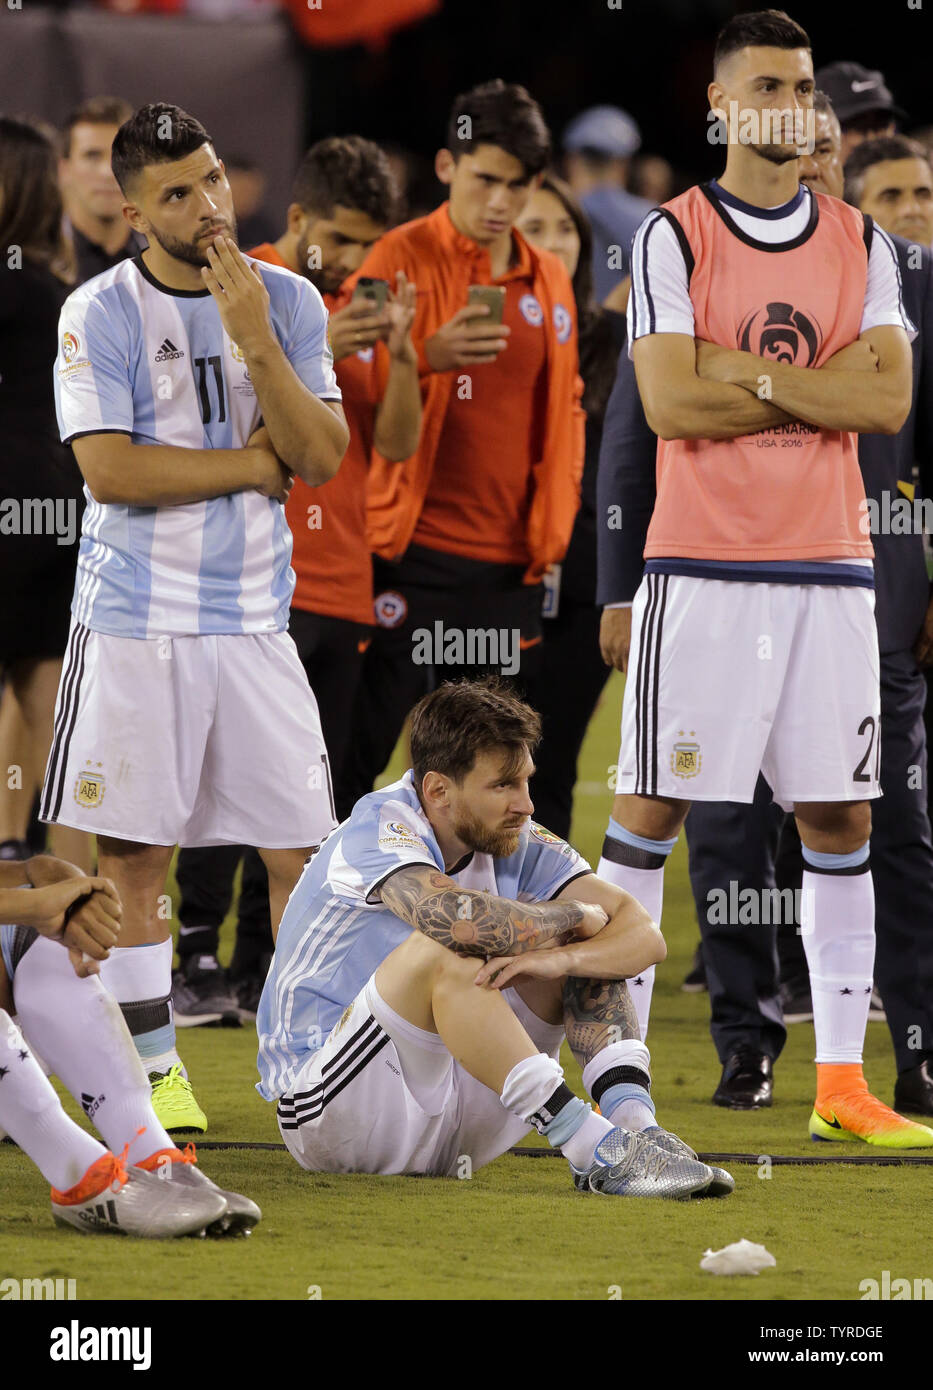 Argentina forward Sergio Aguero (11), midfielder Lionel Messi (10) and midfielder Javier Pastore (right) watch the awards ceremony after they lost the Copa America Centenario USA 2016 Finals to Chile 4-2 in penalty kicks at MetLife Stadium in East Rutherford, New Jersey on June 26, 2016.      Photo by Ray Stubblebine/UPI Stock Photo